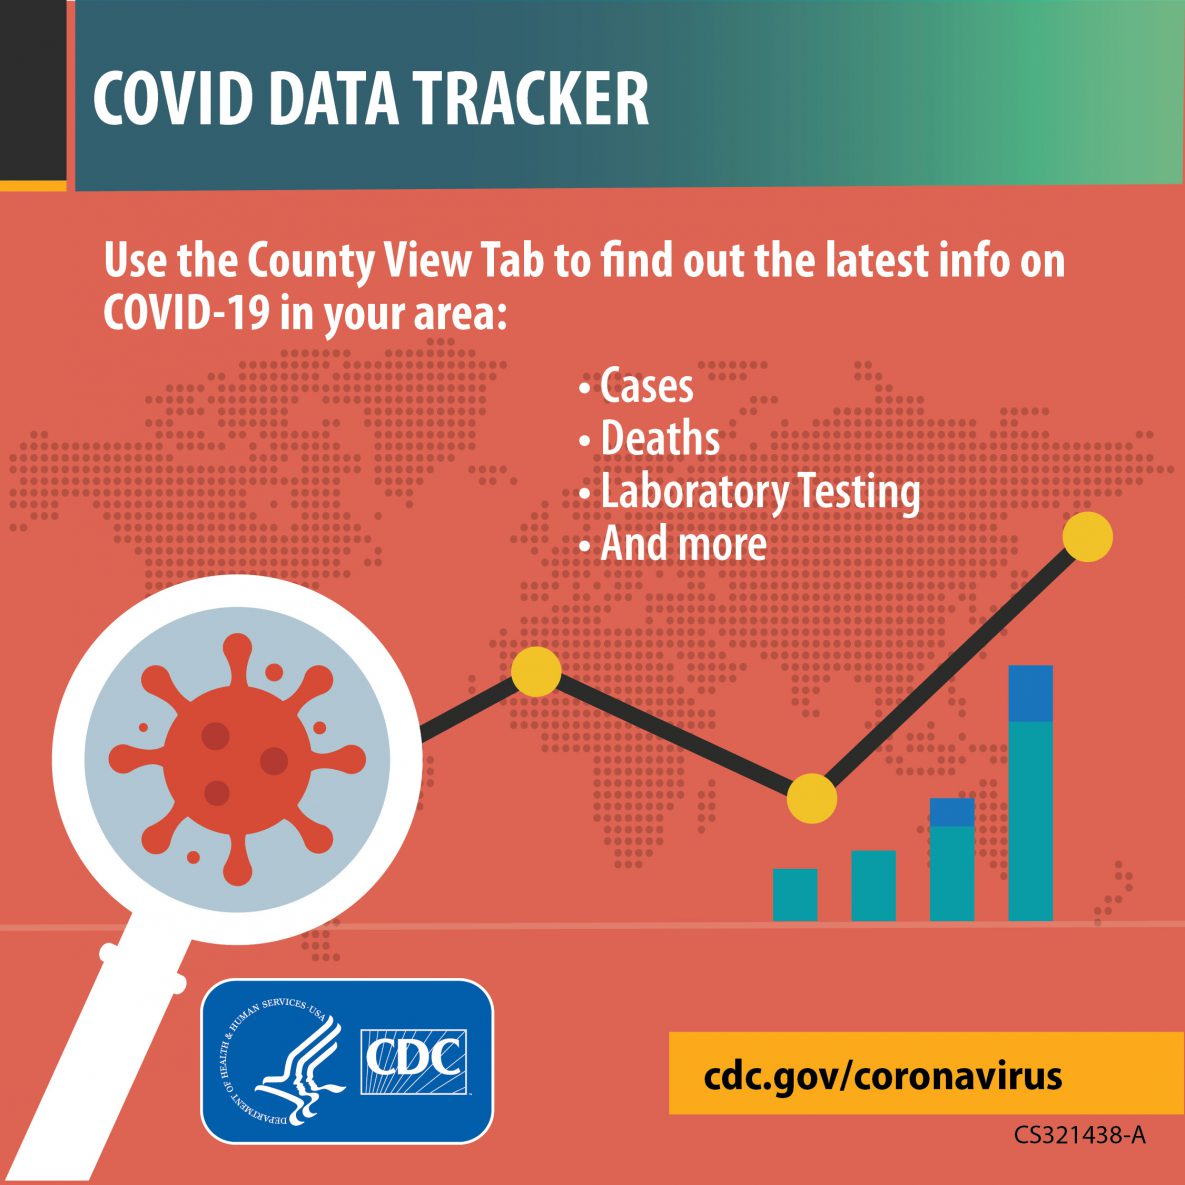 Image shows County View Tab as a source for county-level data.